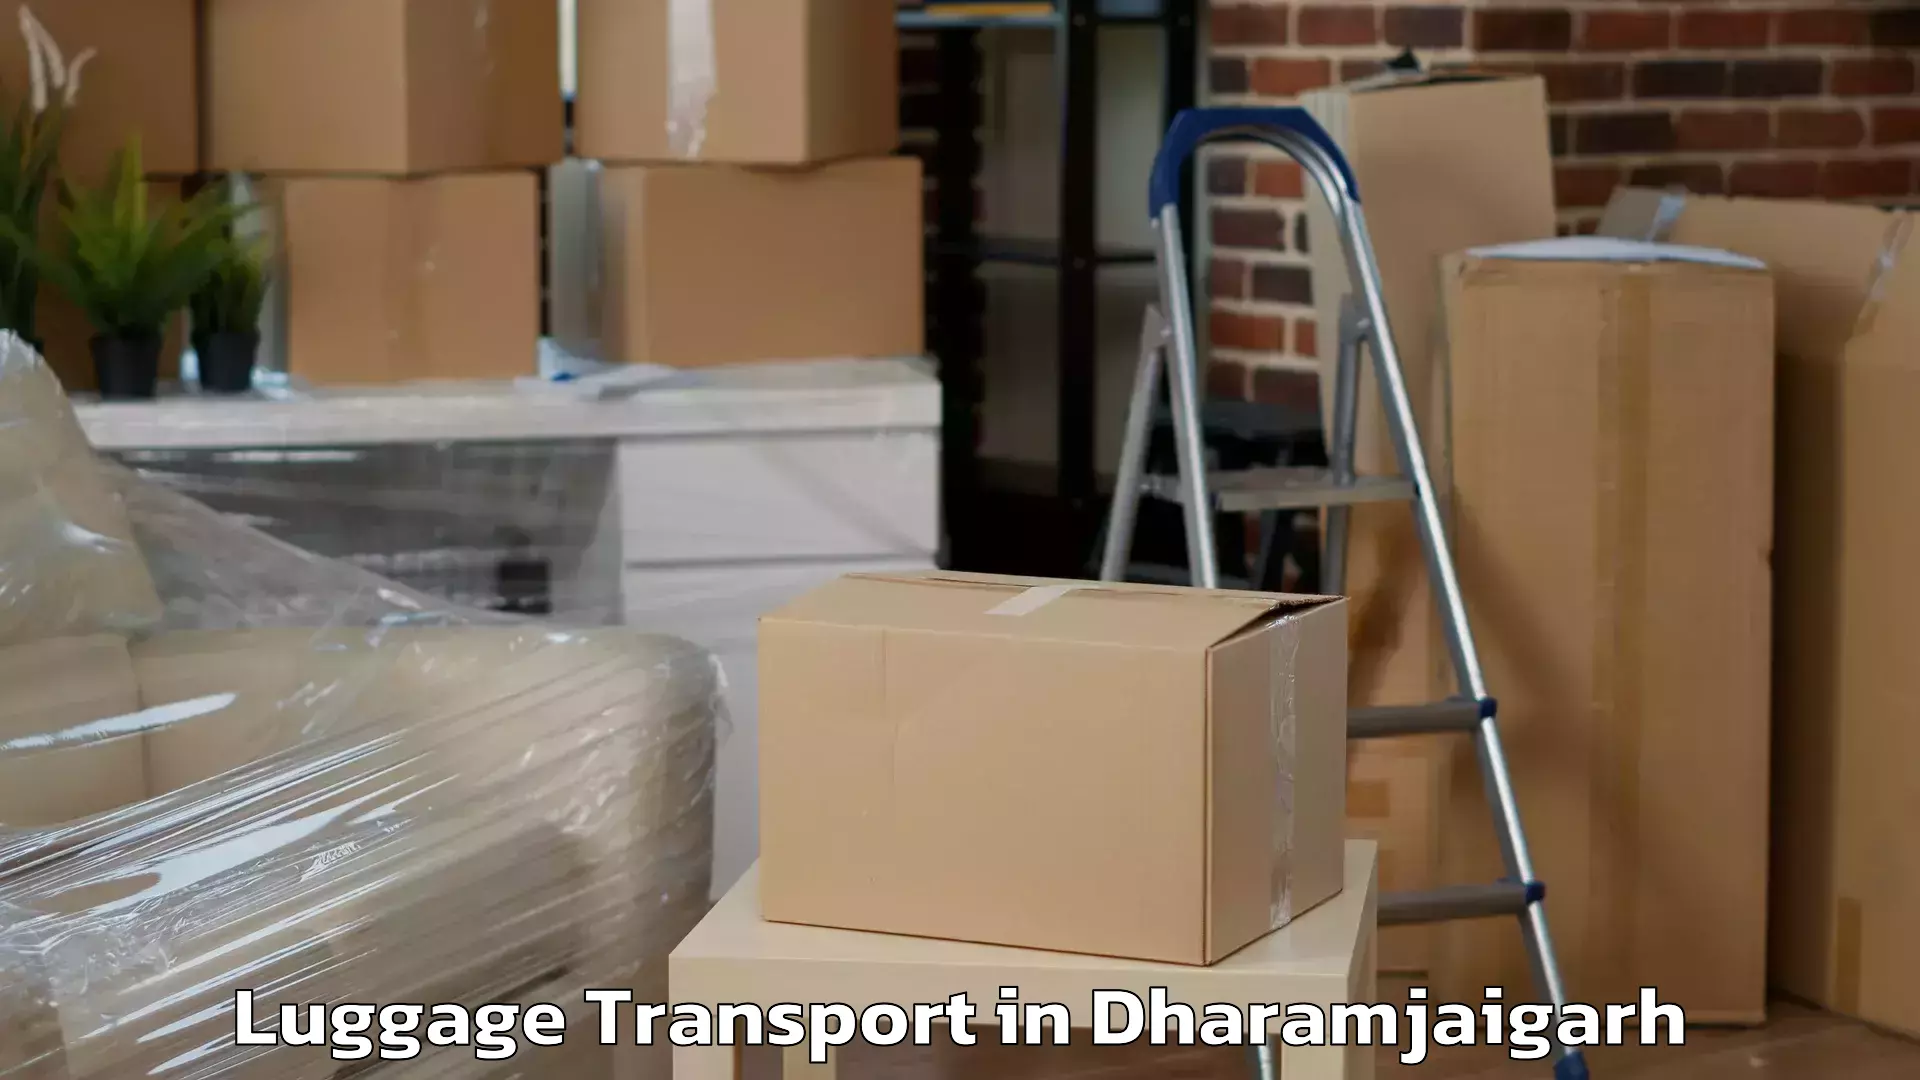 Efficient baggage transport in Dharamjaigarh